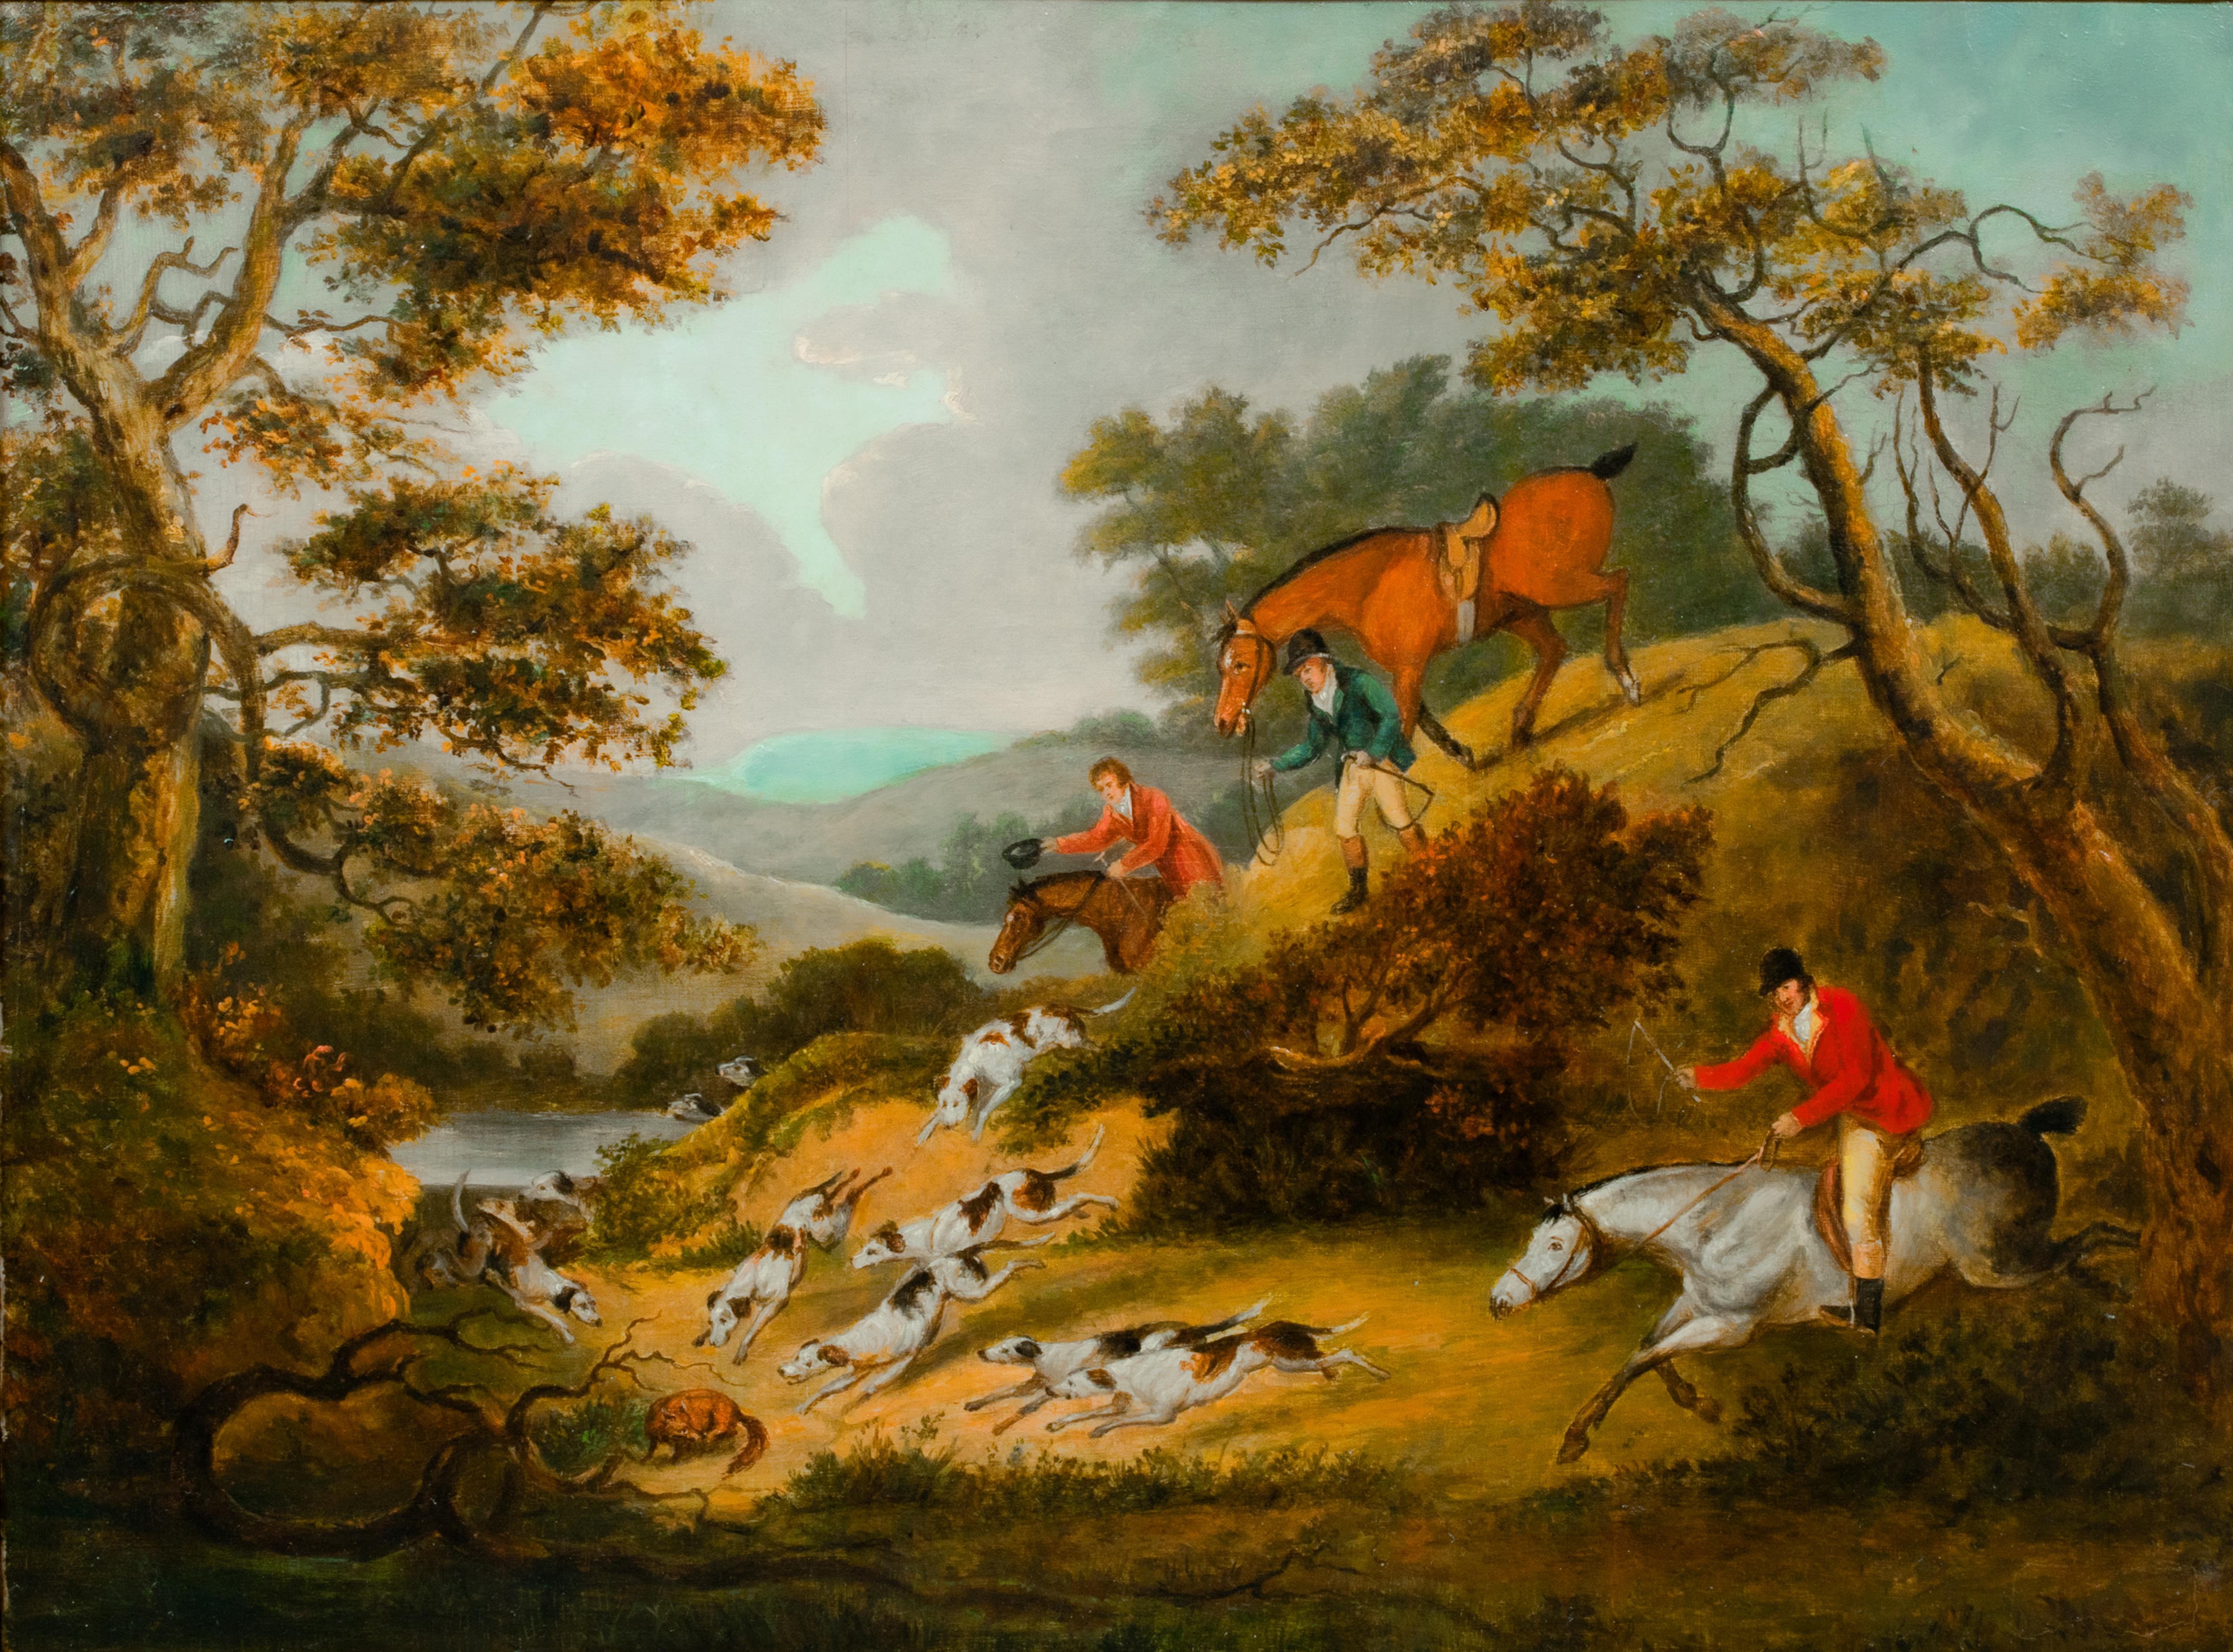 Unknown Landscape Painting -  In For The Kill, 18th/19th Century   by Dean Westenholme (1757-1837) 